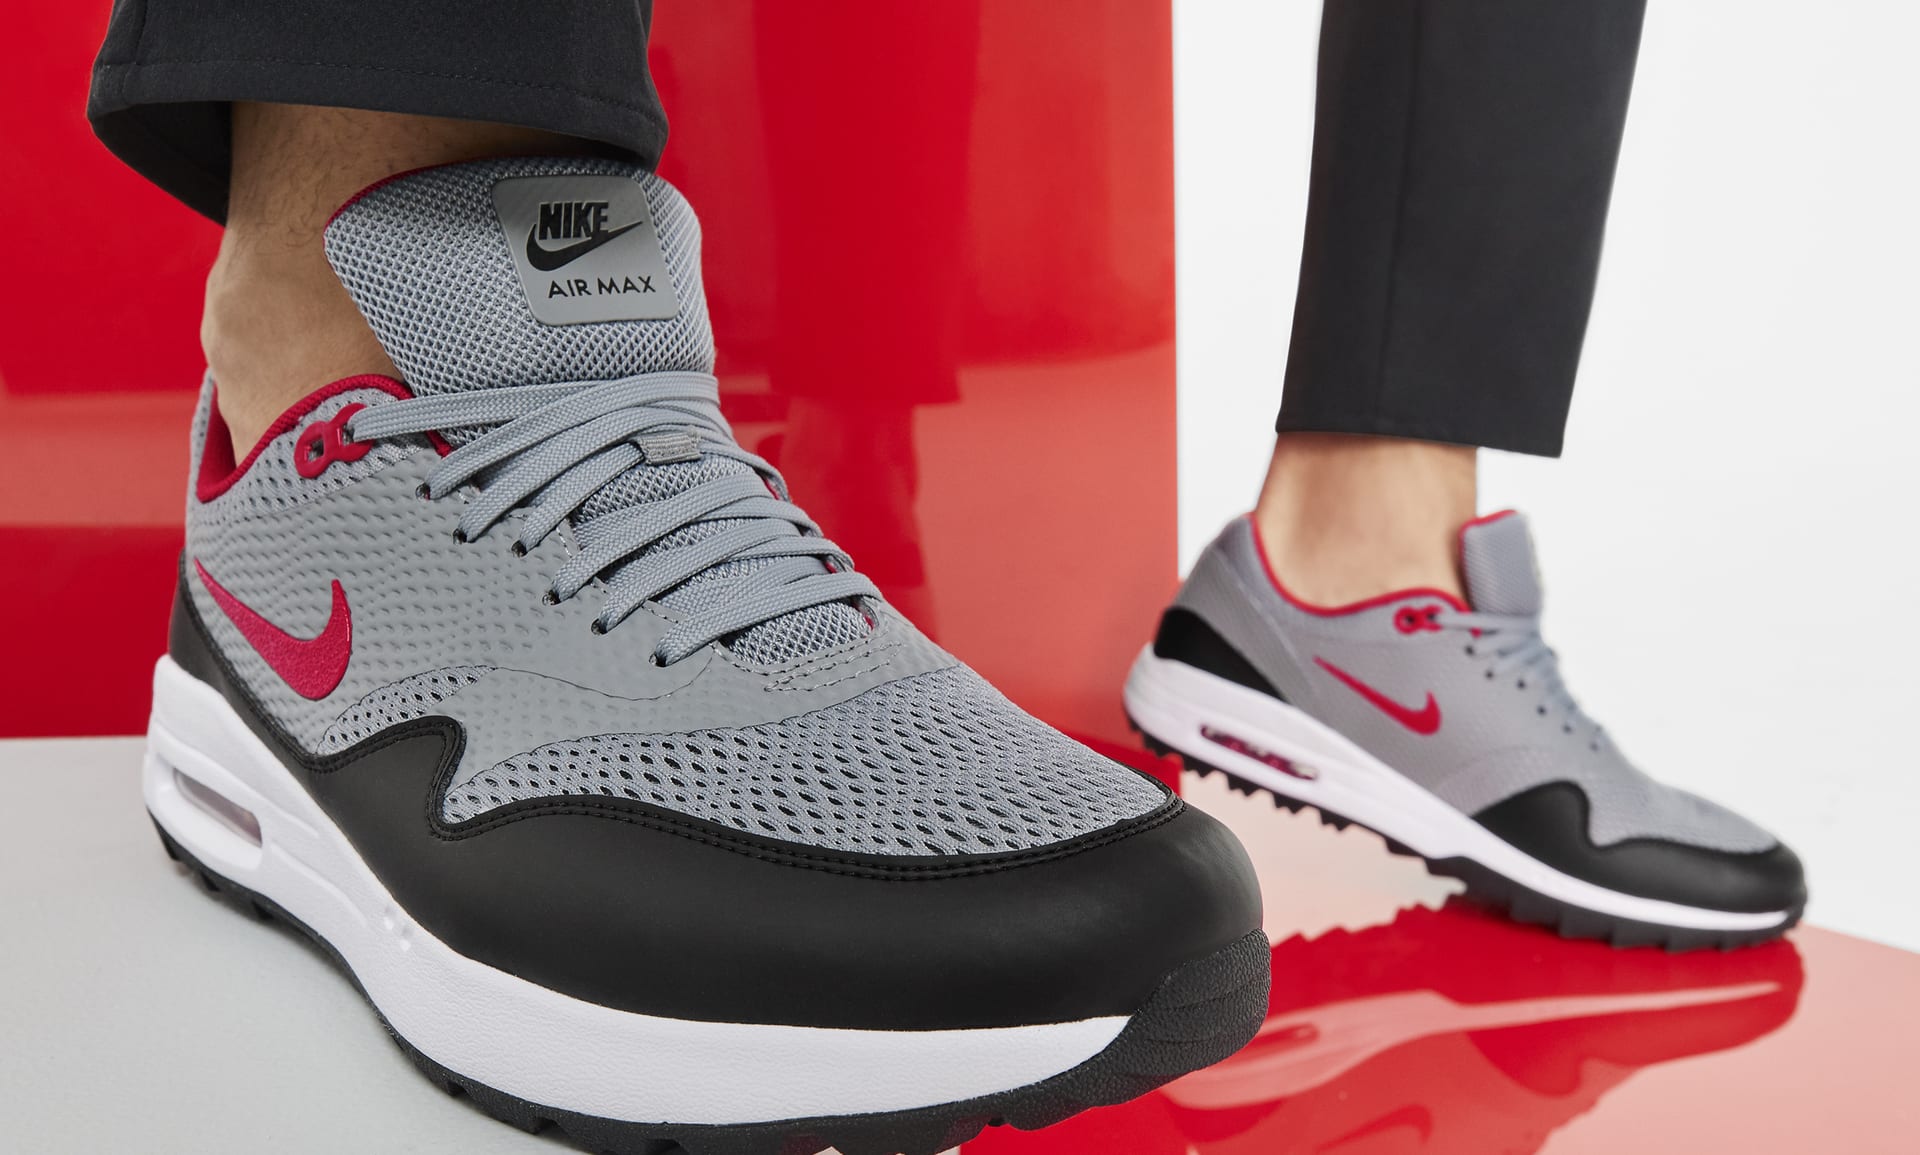 nike air max 1 g spikeless golf shoes